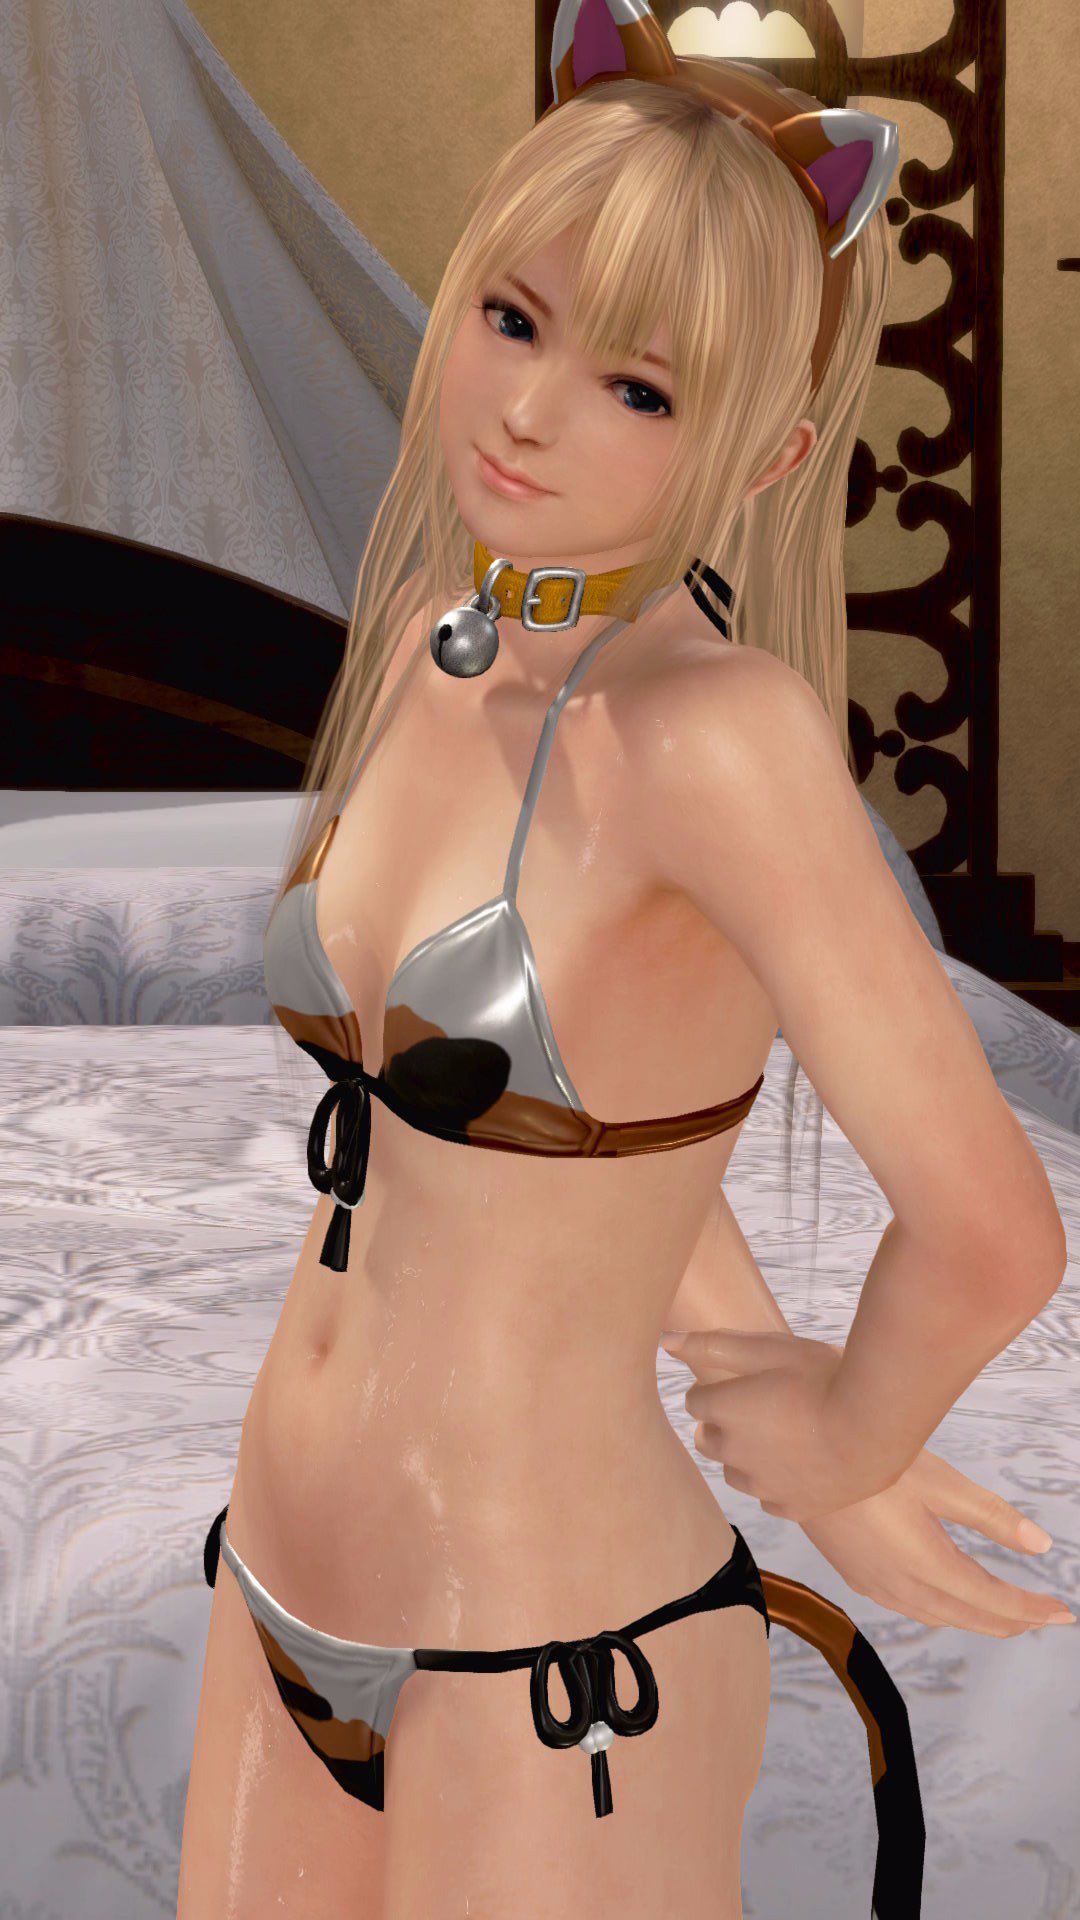 Marie Rose, a martial artist who was born only to be dressed in a lewd way, wwwwwww 9